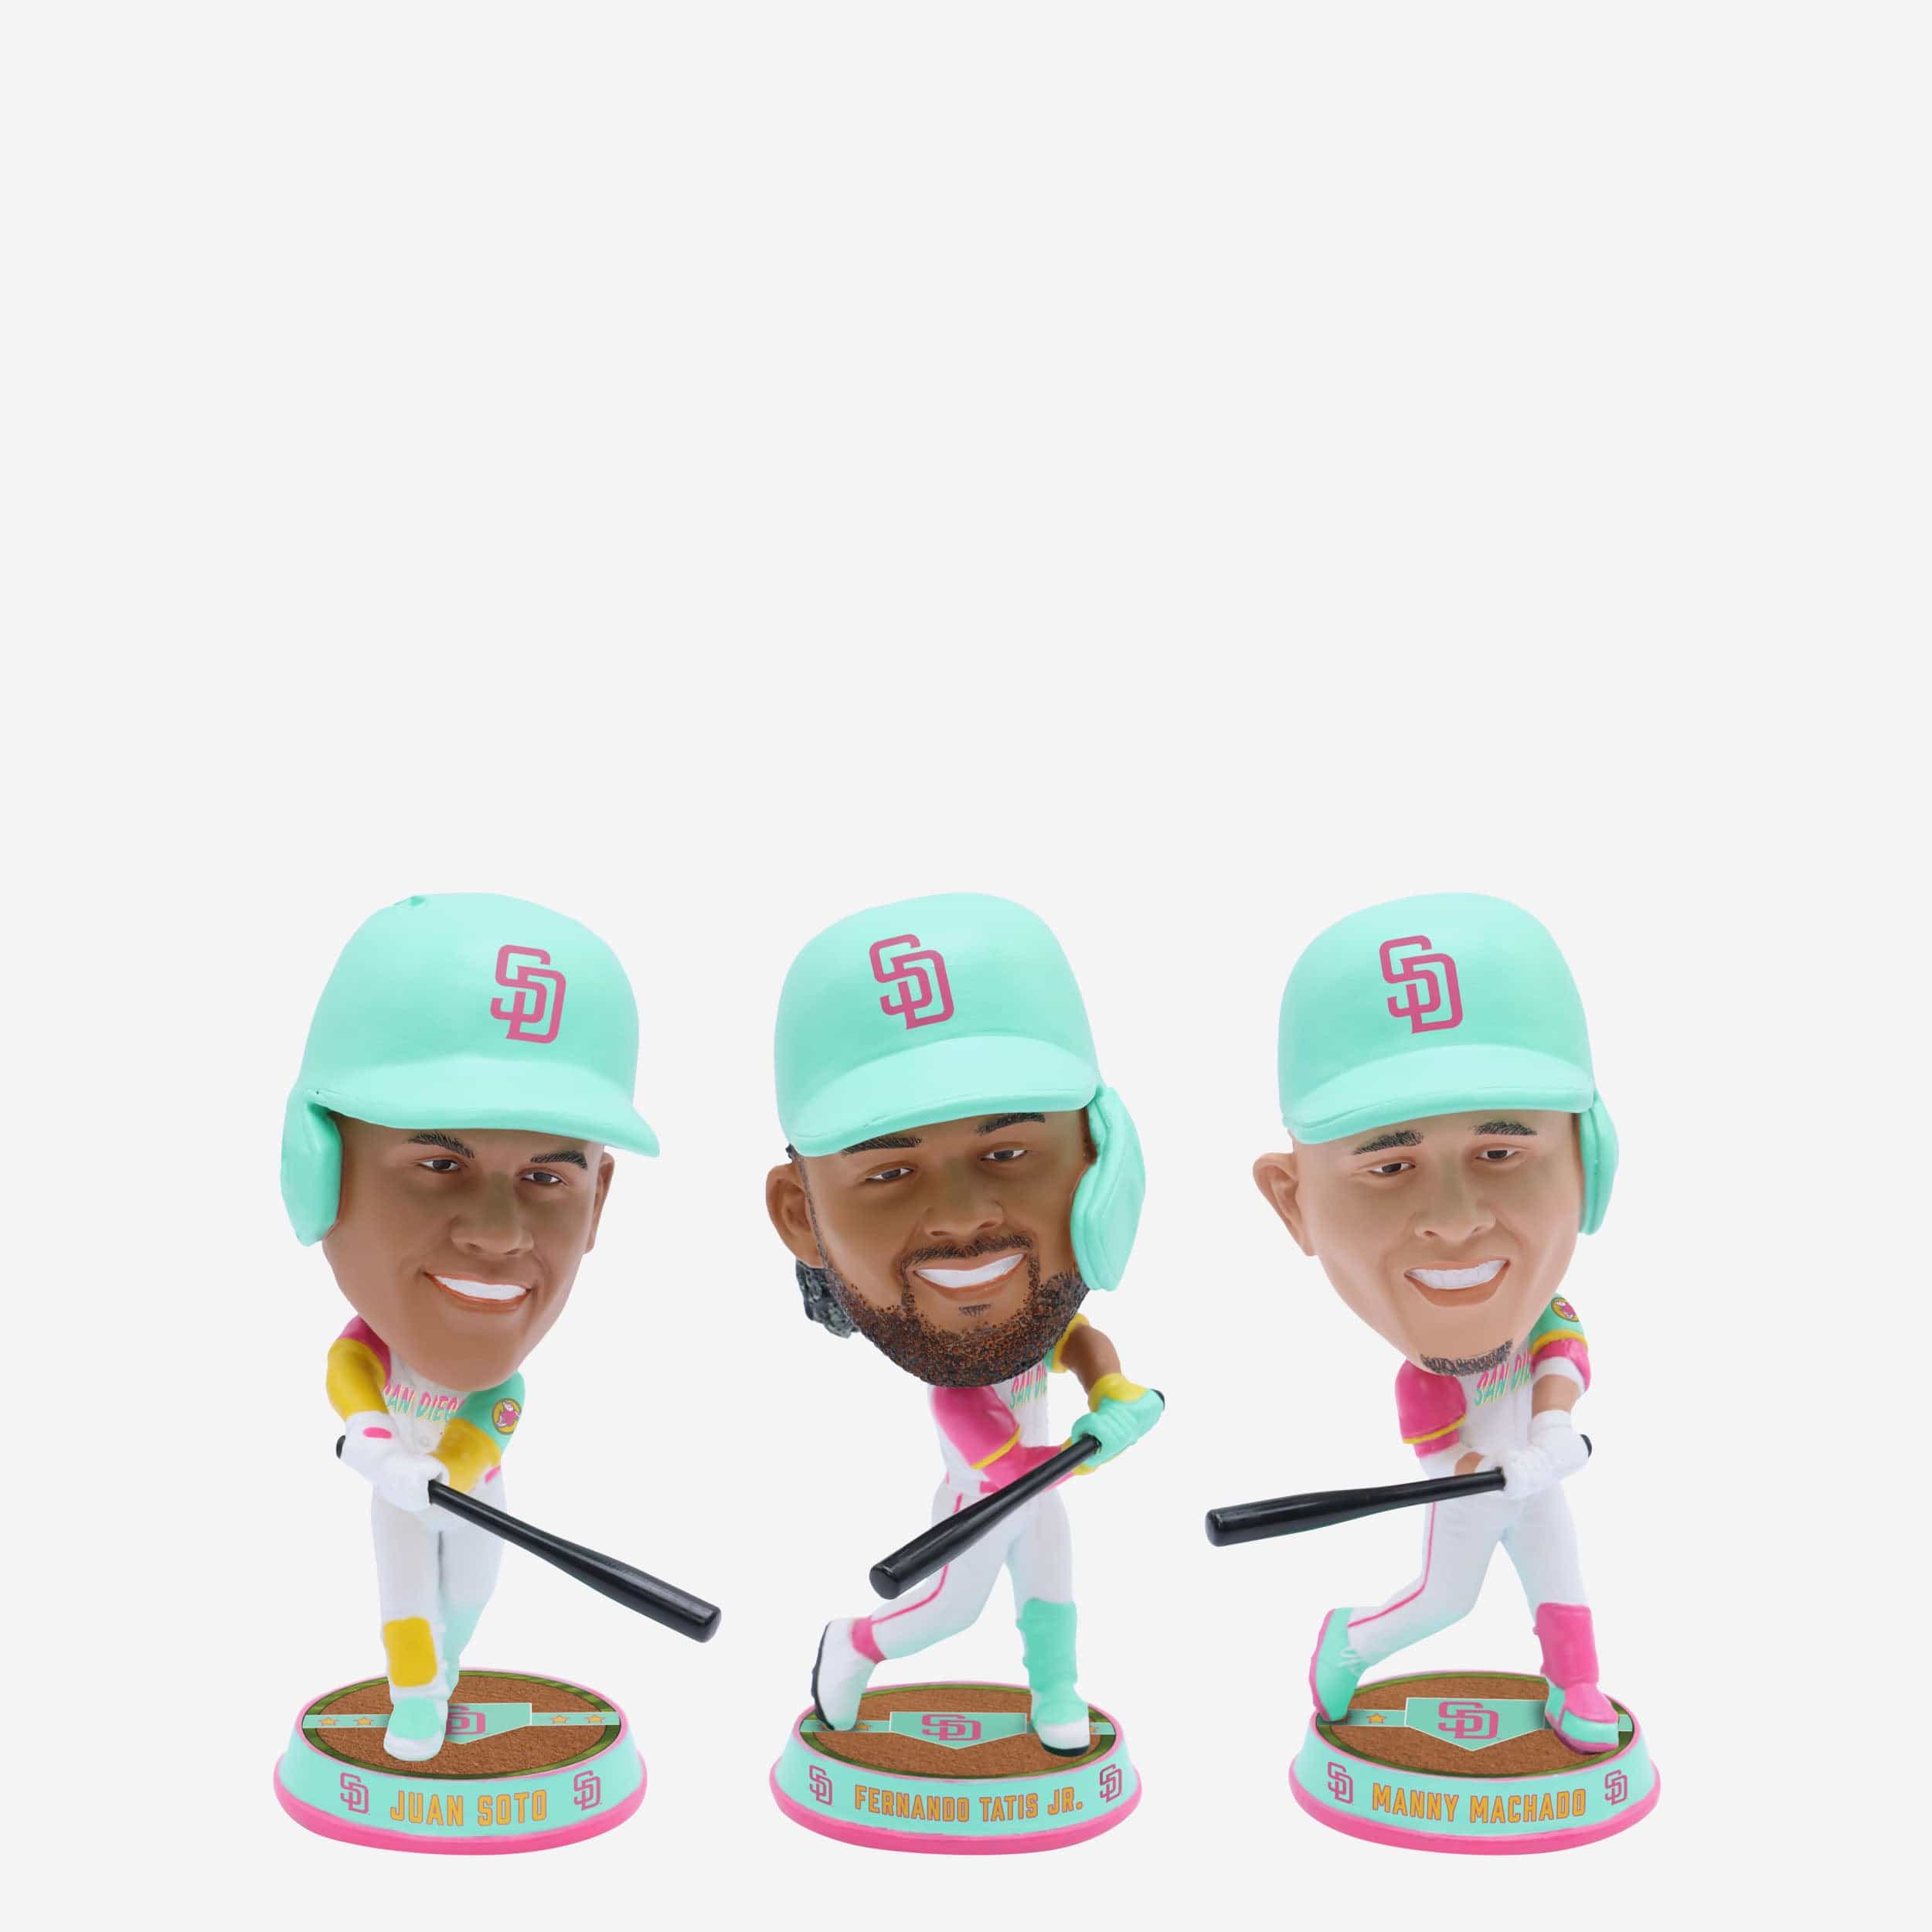 New Fernando Tatis Jr. and Juan Soto City Connect bobbleheads released  today! - Gaslamp Ball